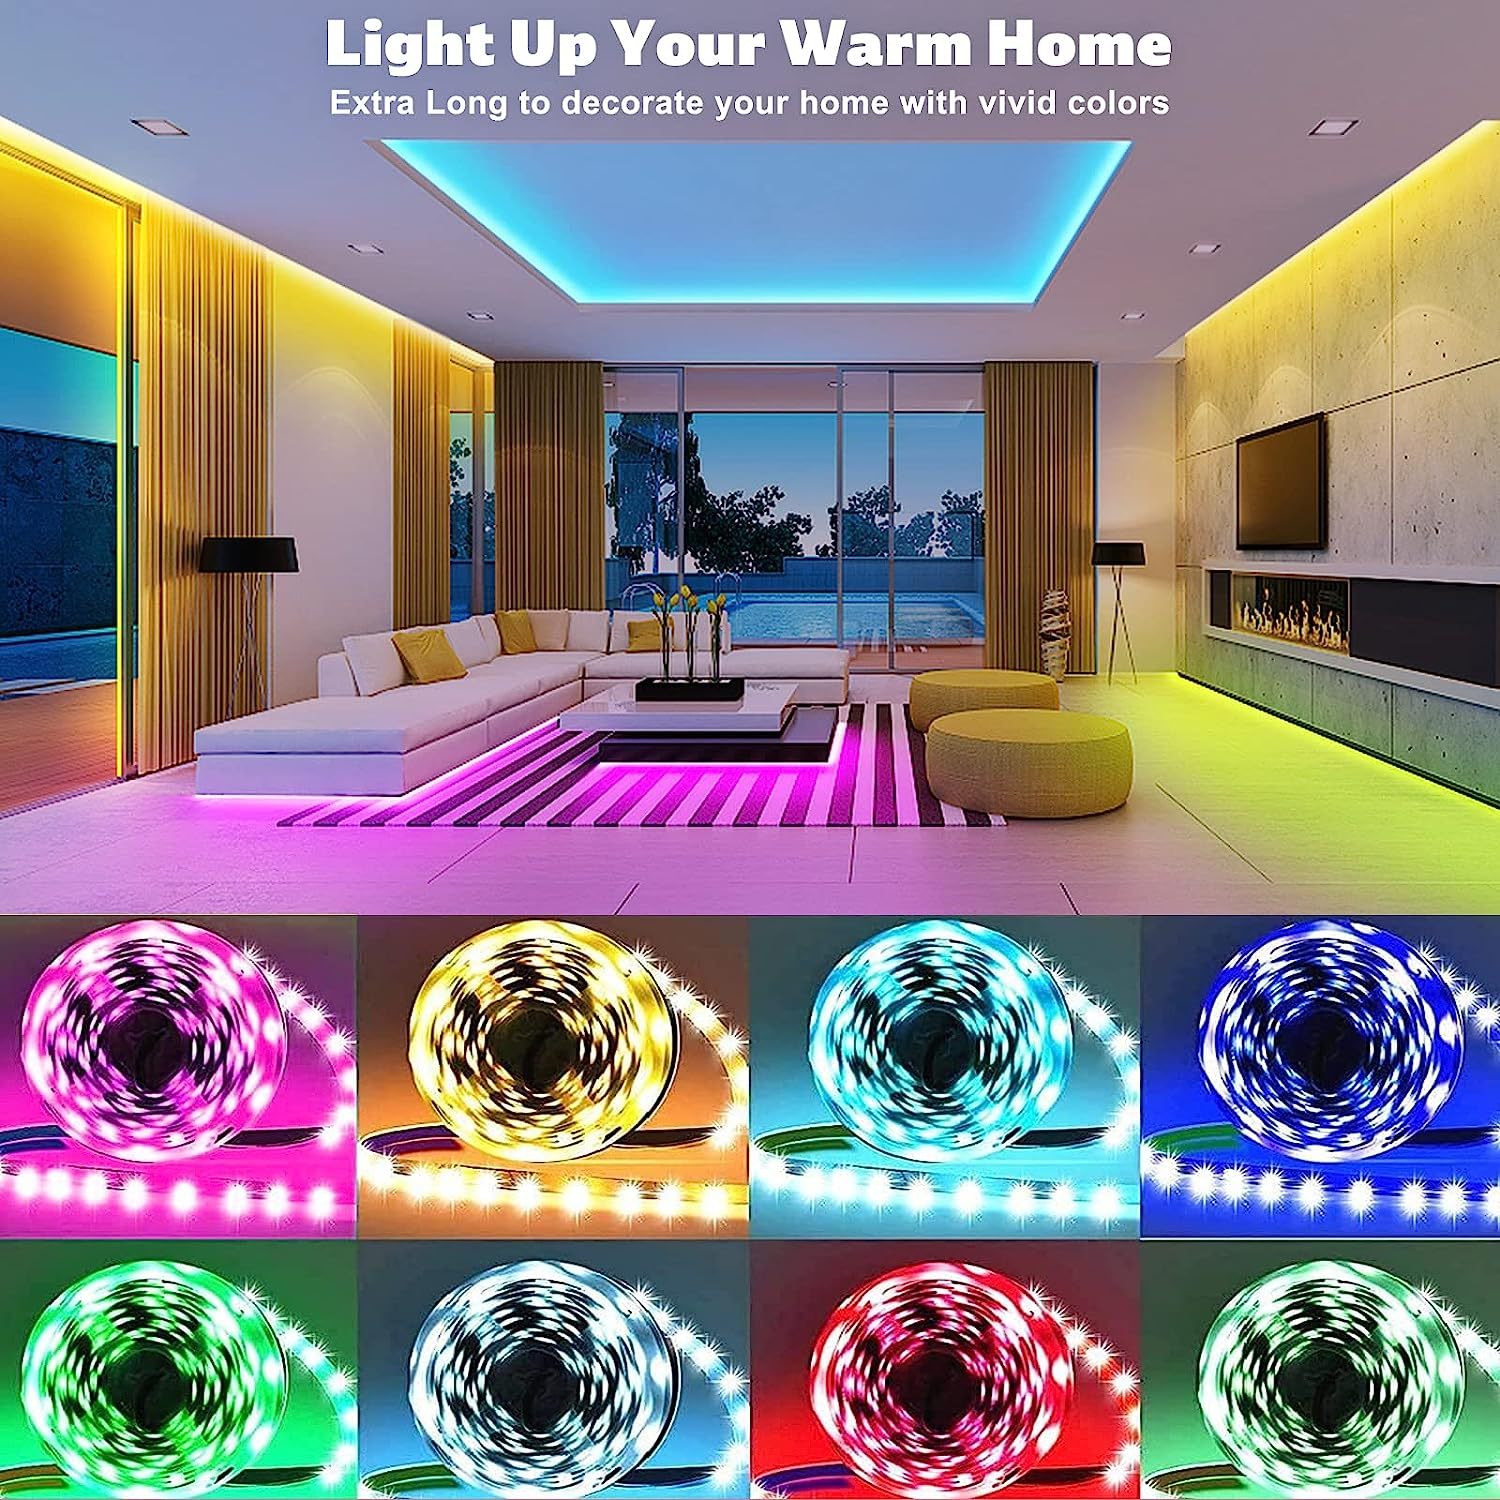 40m 130ft led lights for bedroom 2 rolls of 65ft smart rgb led strip lights with 44 keys remote control and app control music sync lights color changing lights for home party halloween christmas decorative light strip details 0